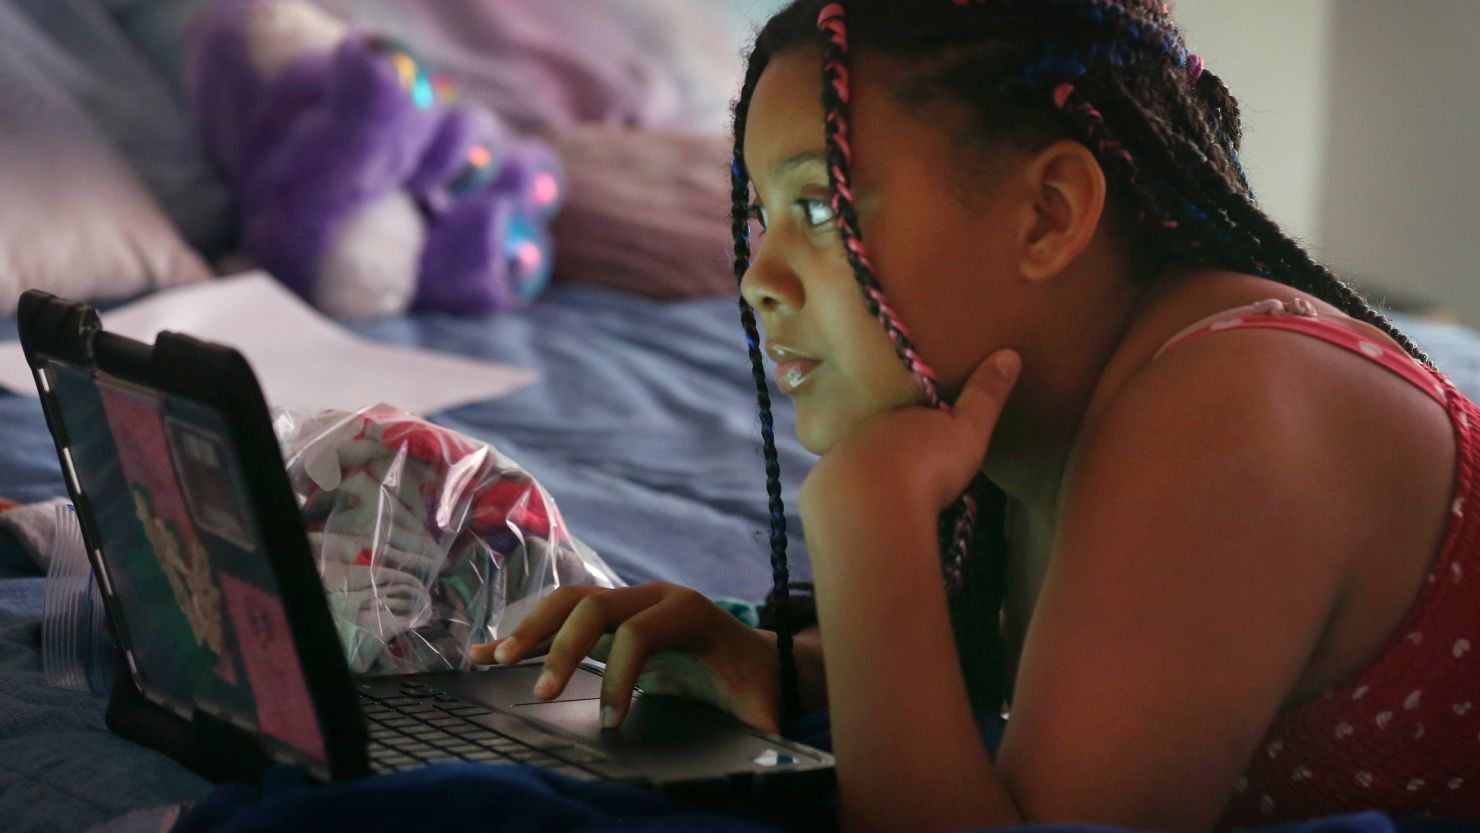 Alayjah Burnett, 13, attends an online class at her home in Vallejo, California on Thursday, April 23, 2020. Alayjah's mom, Michelle Burnett, says she's worried about the shift toward distance learning. "I just feel like she's going to get left in the dust," she says.